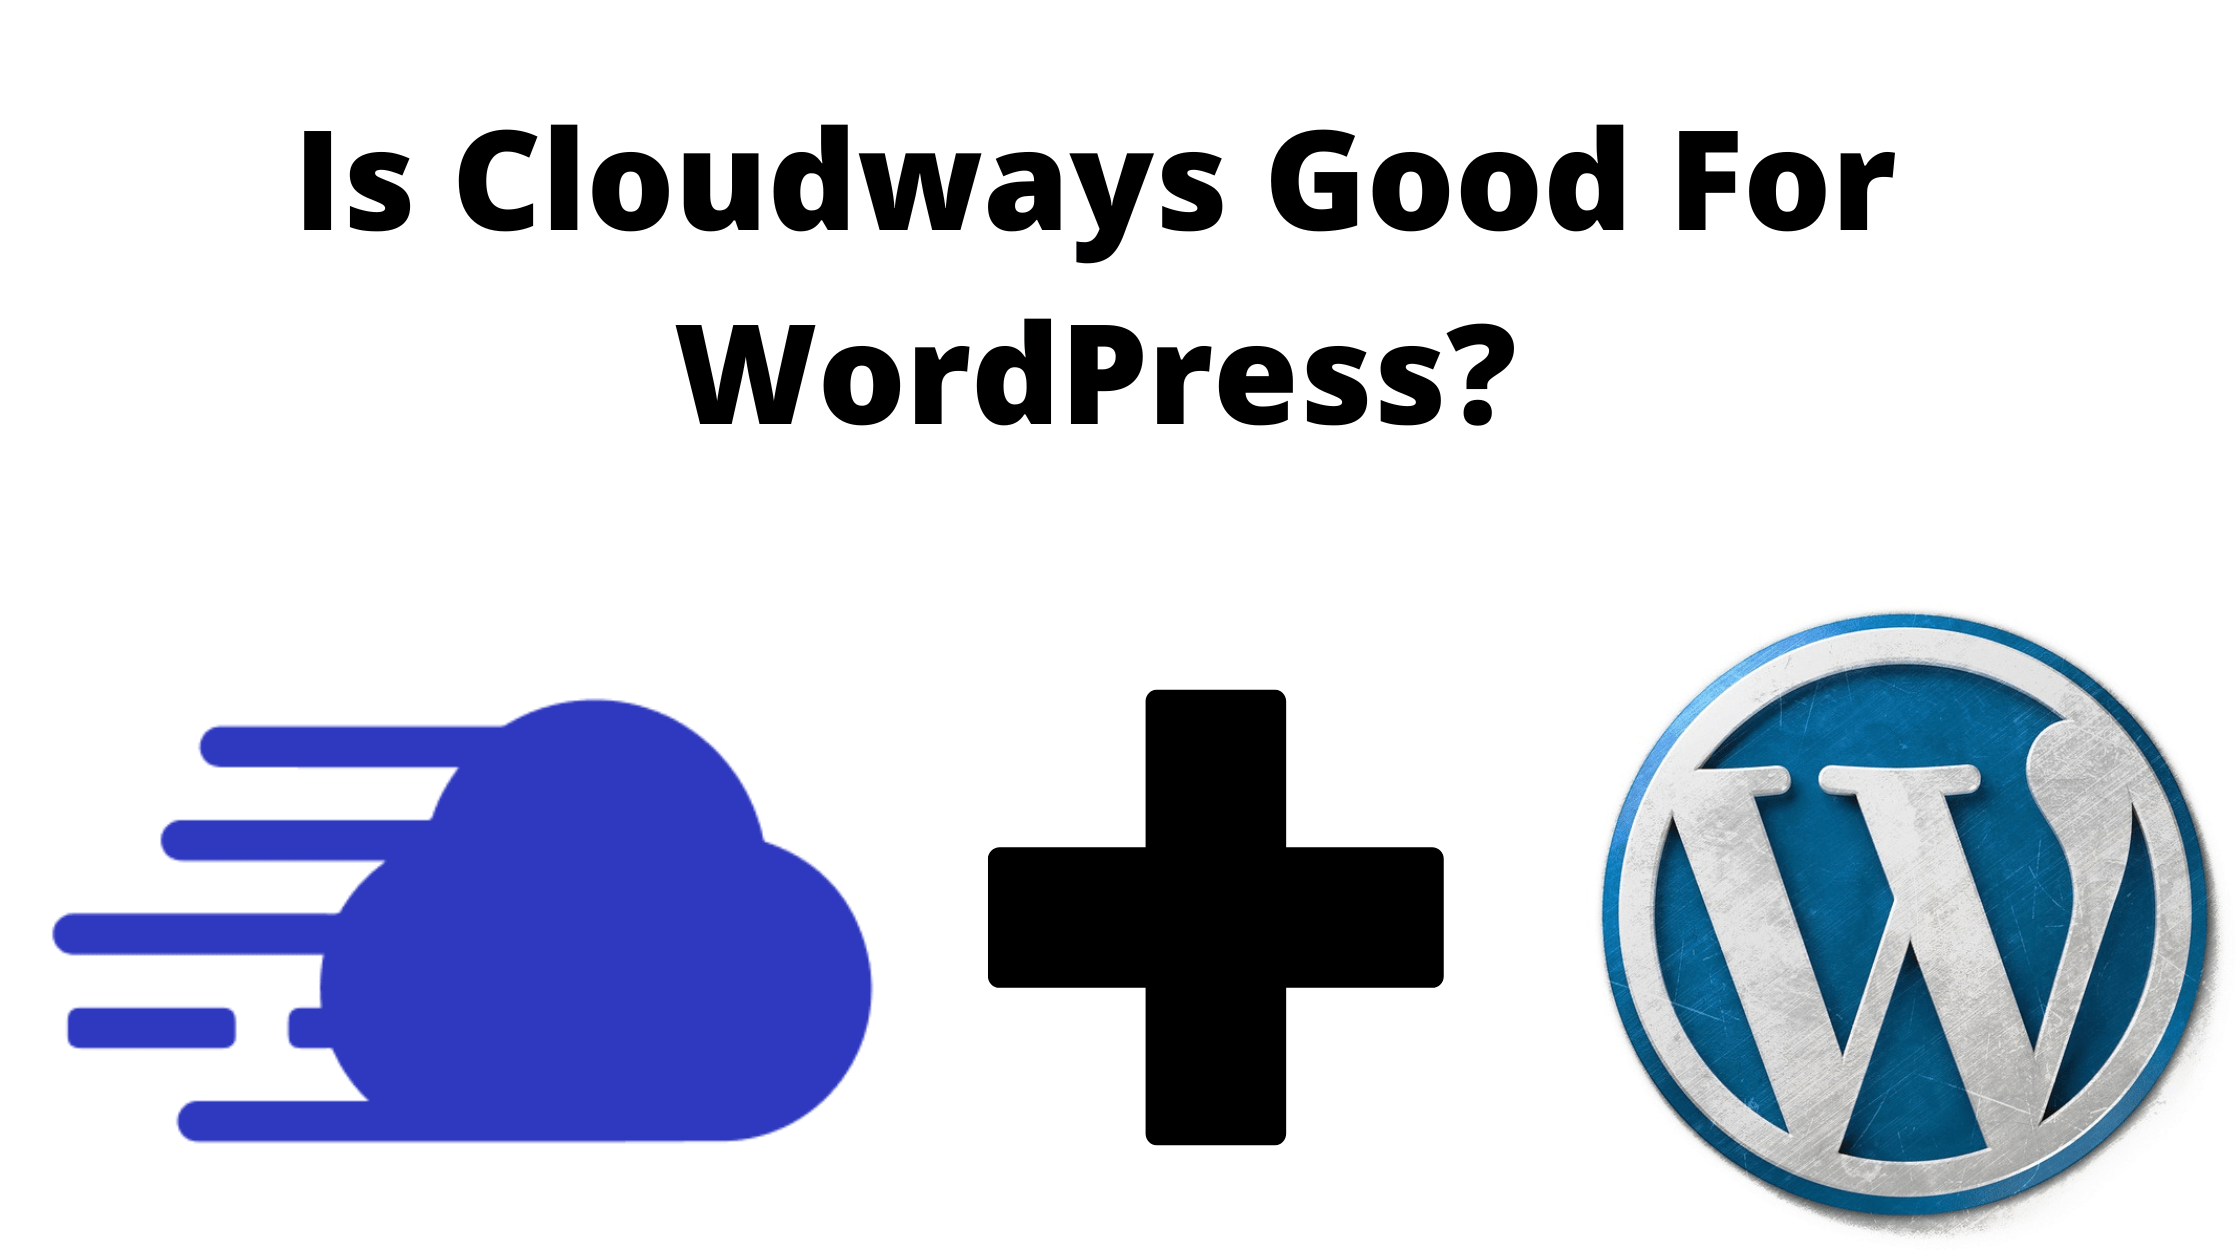 is cloudways good for wordpress?